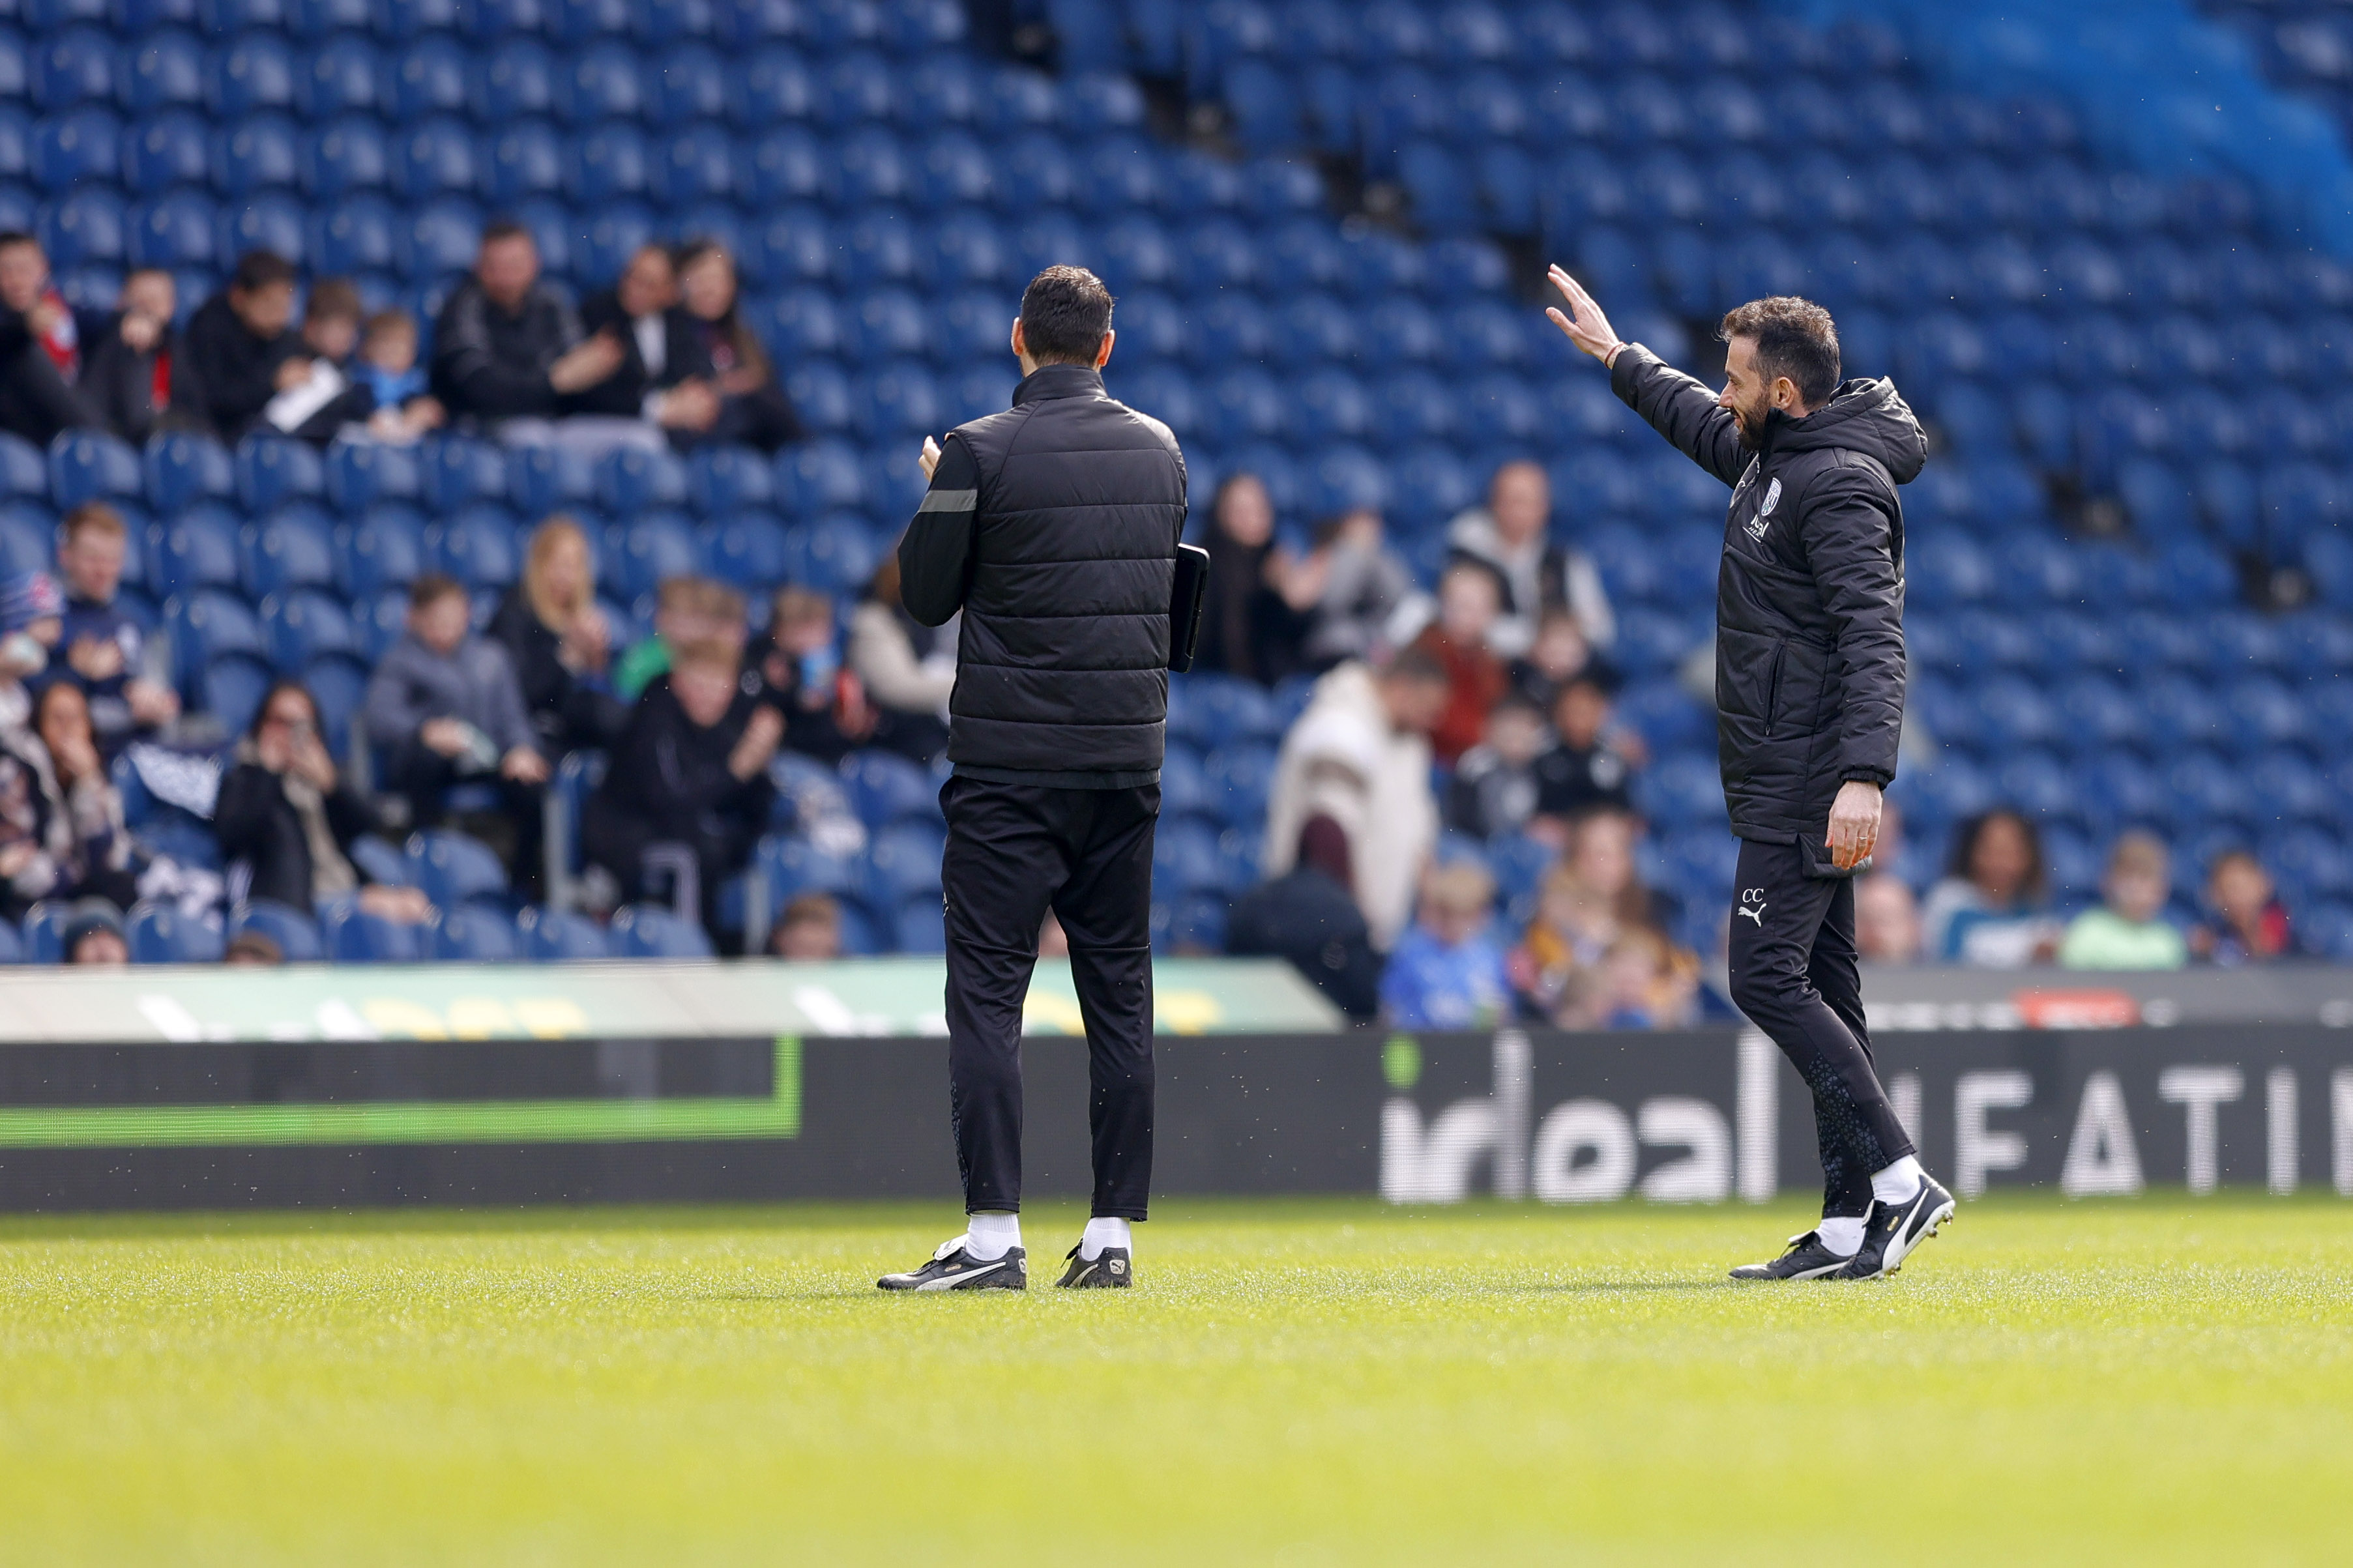 Carlos Corberán waving to supporters during a training session at The Hawthorns